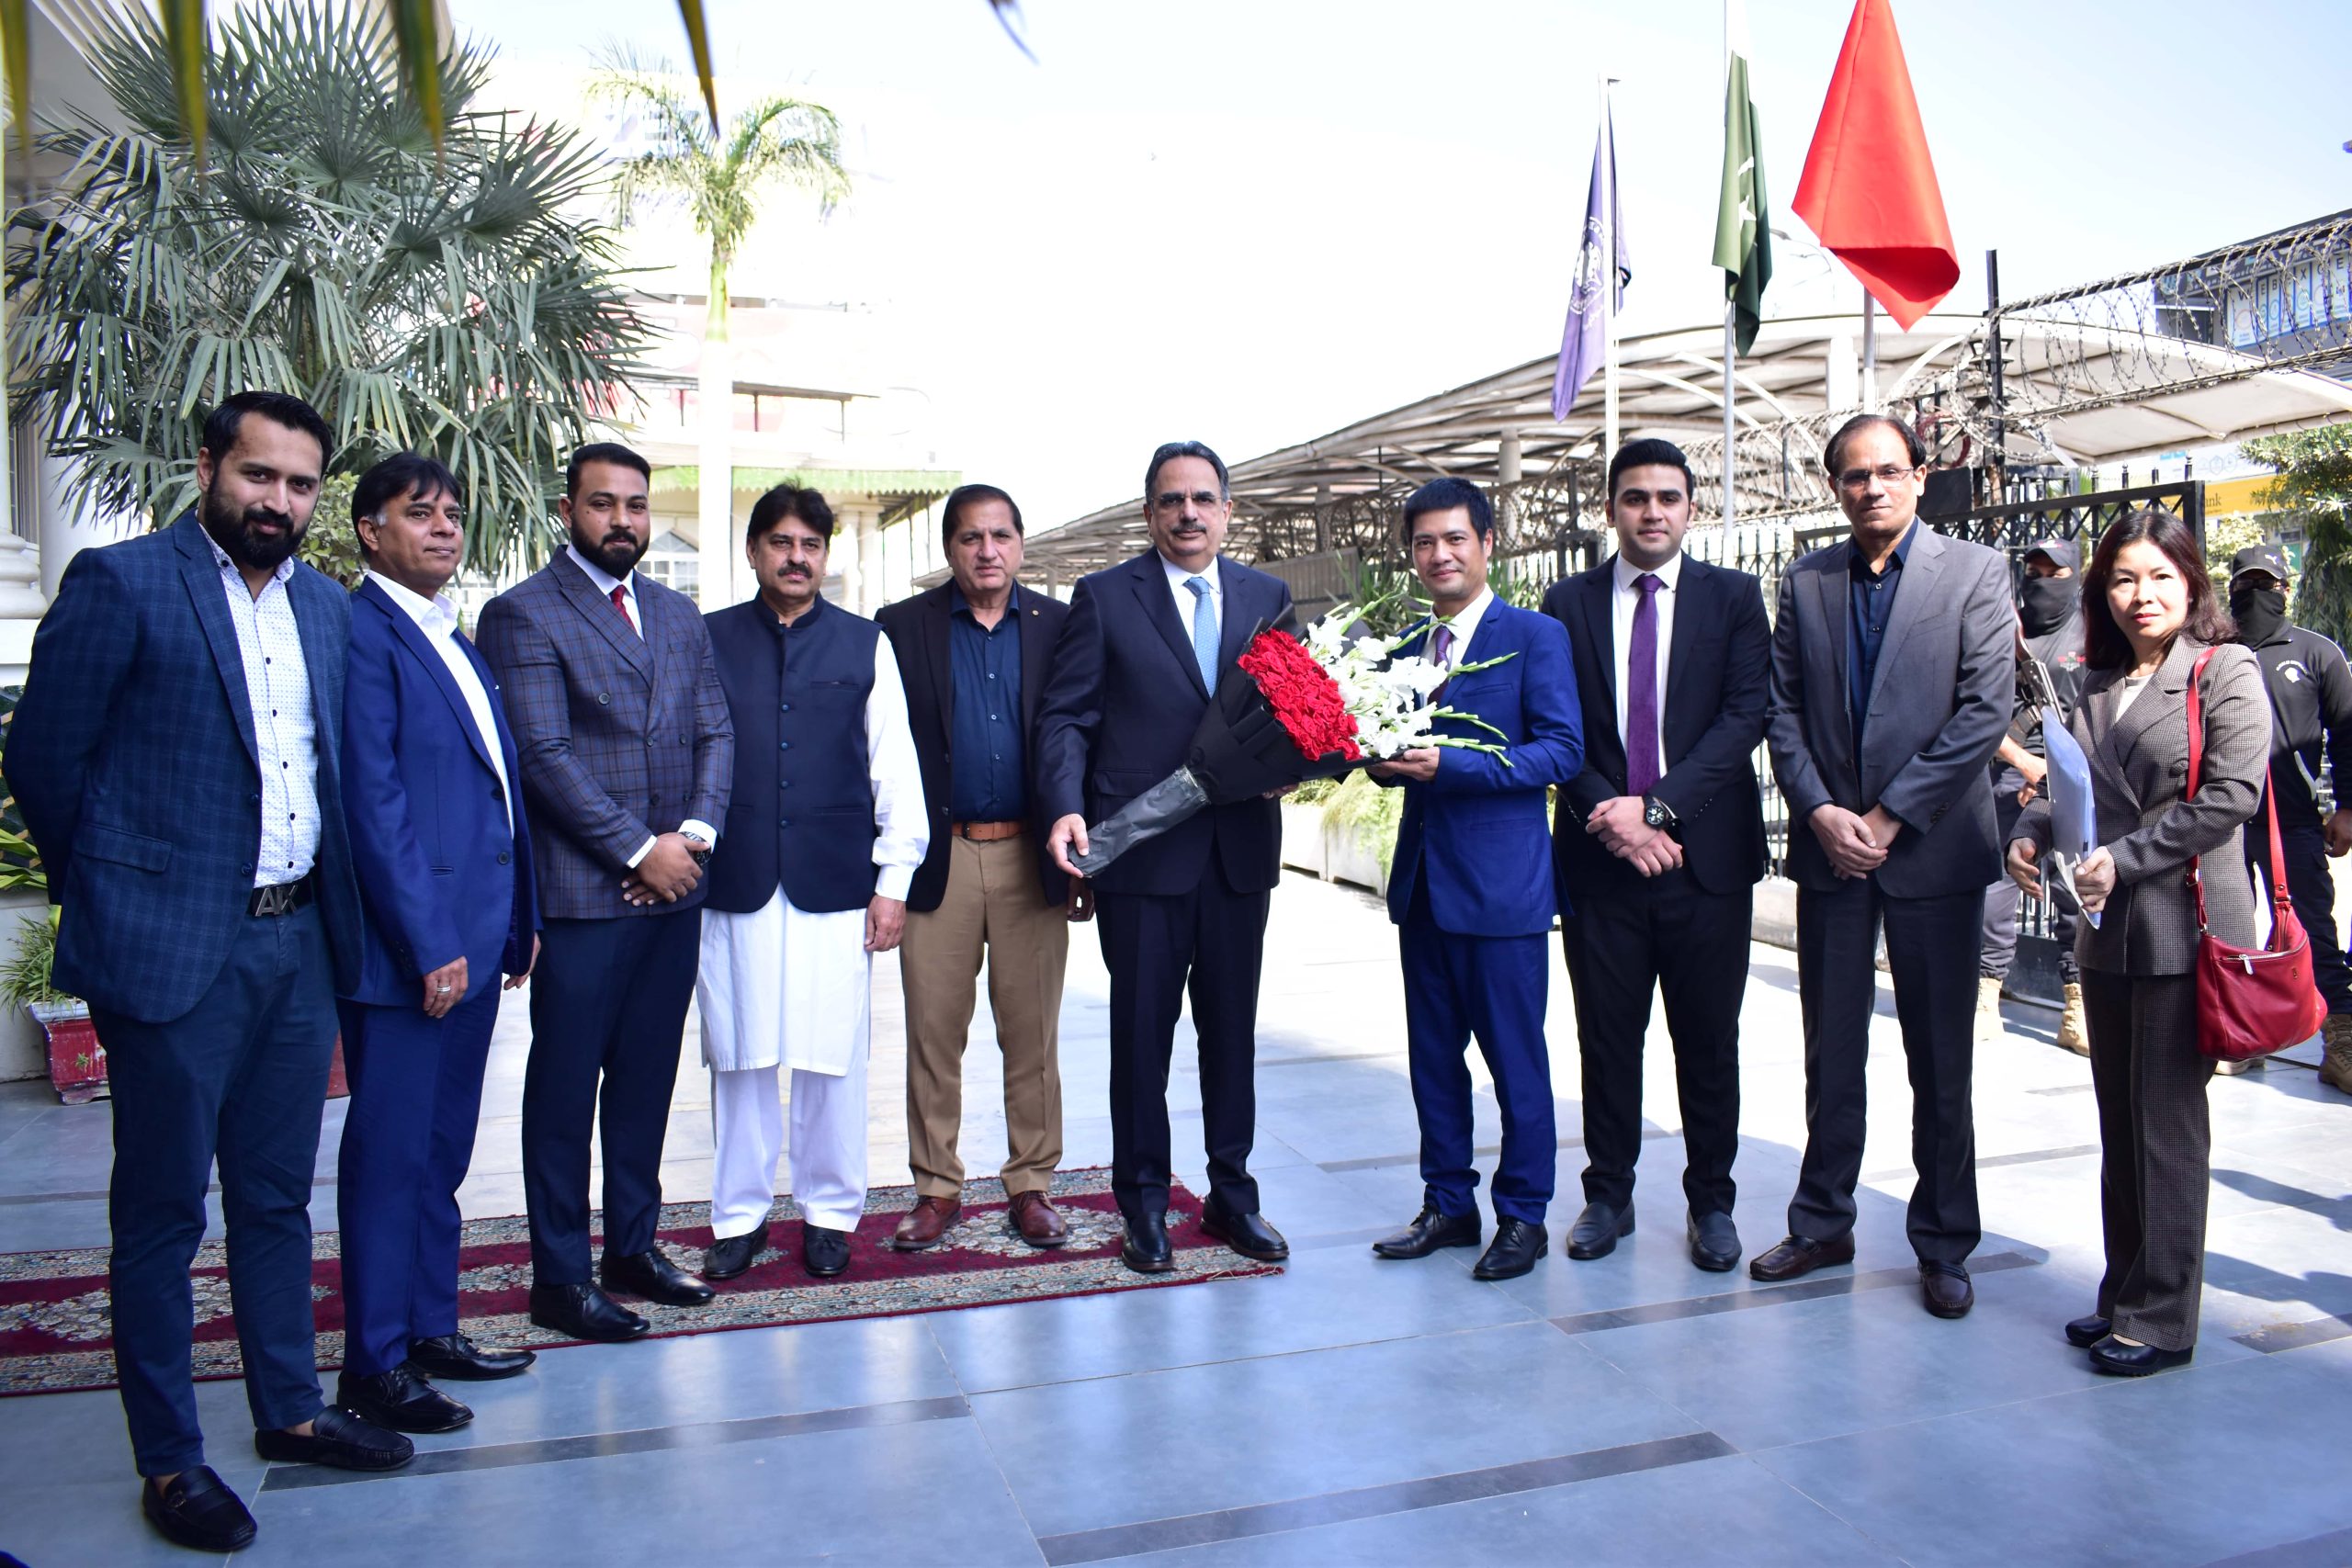 On the 4th of November 2023, His Excellency Mr. Nguyen Tien Phong, the Ambassador of The Socialist Republic of Vietnam, paid a visit to the Sialkot Chamber of Commerce and Industry (SCCI) to engage with the business community of Sialkot. The Ambassador was received by Mr. Abdul Ghafoor Malik, President of SCCI and executive committee members. In his address The President SCCI highlighted the need to explore the untapped trade potential between Vietnam and Pakistan through the signing of a Free Trade Agreement (FTA), the reciprocal exchange of Trade Delegations, organizing a single-country exhibition, the facilitation of long-term visas on the SCCI’s guarantee letter to foster stronger bilateral relations, the sharing of details concerning E-Commerce platforms, and the promotion of joint ventures with Digital Technology Companies to bolster the presence of Sialkot-manufactured products in Vietnam. His Excellency Mr. Nguyen Tien Phong, in response, expressed his heartfelt appreciation gratitude for the warm welcome and the meaningful interaction with the dynamic business community. In addressing the queries raised by the attendees, the Ambassador emphasized the significant potential of Sialkot-manufactured products in Vietnam and stressed the importance of encouraging collaboration between the business communities on both sides. He highlighted the necessity for Pakistani and Vietnamese businessmen to familiarize themselves with the pertinent rules and regulations governing investments in promising sectors. Moreover, His Excellency warmly extended an invitation to a trade delegation comprising 20 Pakistani businessmen to visit Vietnam, with the aim of fostering and expanding bilateral trade between the two nations. He also ensured all possible support and cooperation of Embassy of Vietnam in improving bilateral trade.